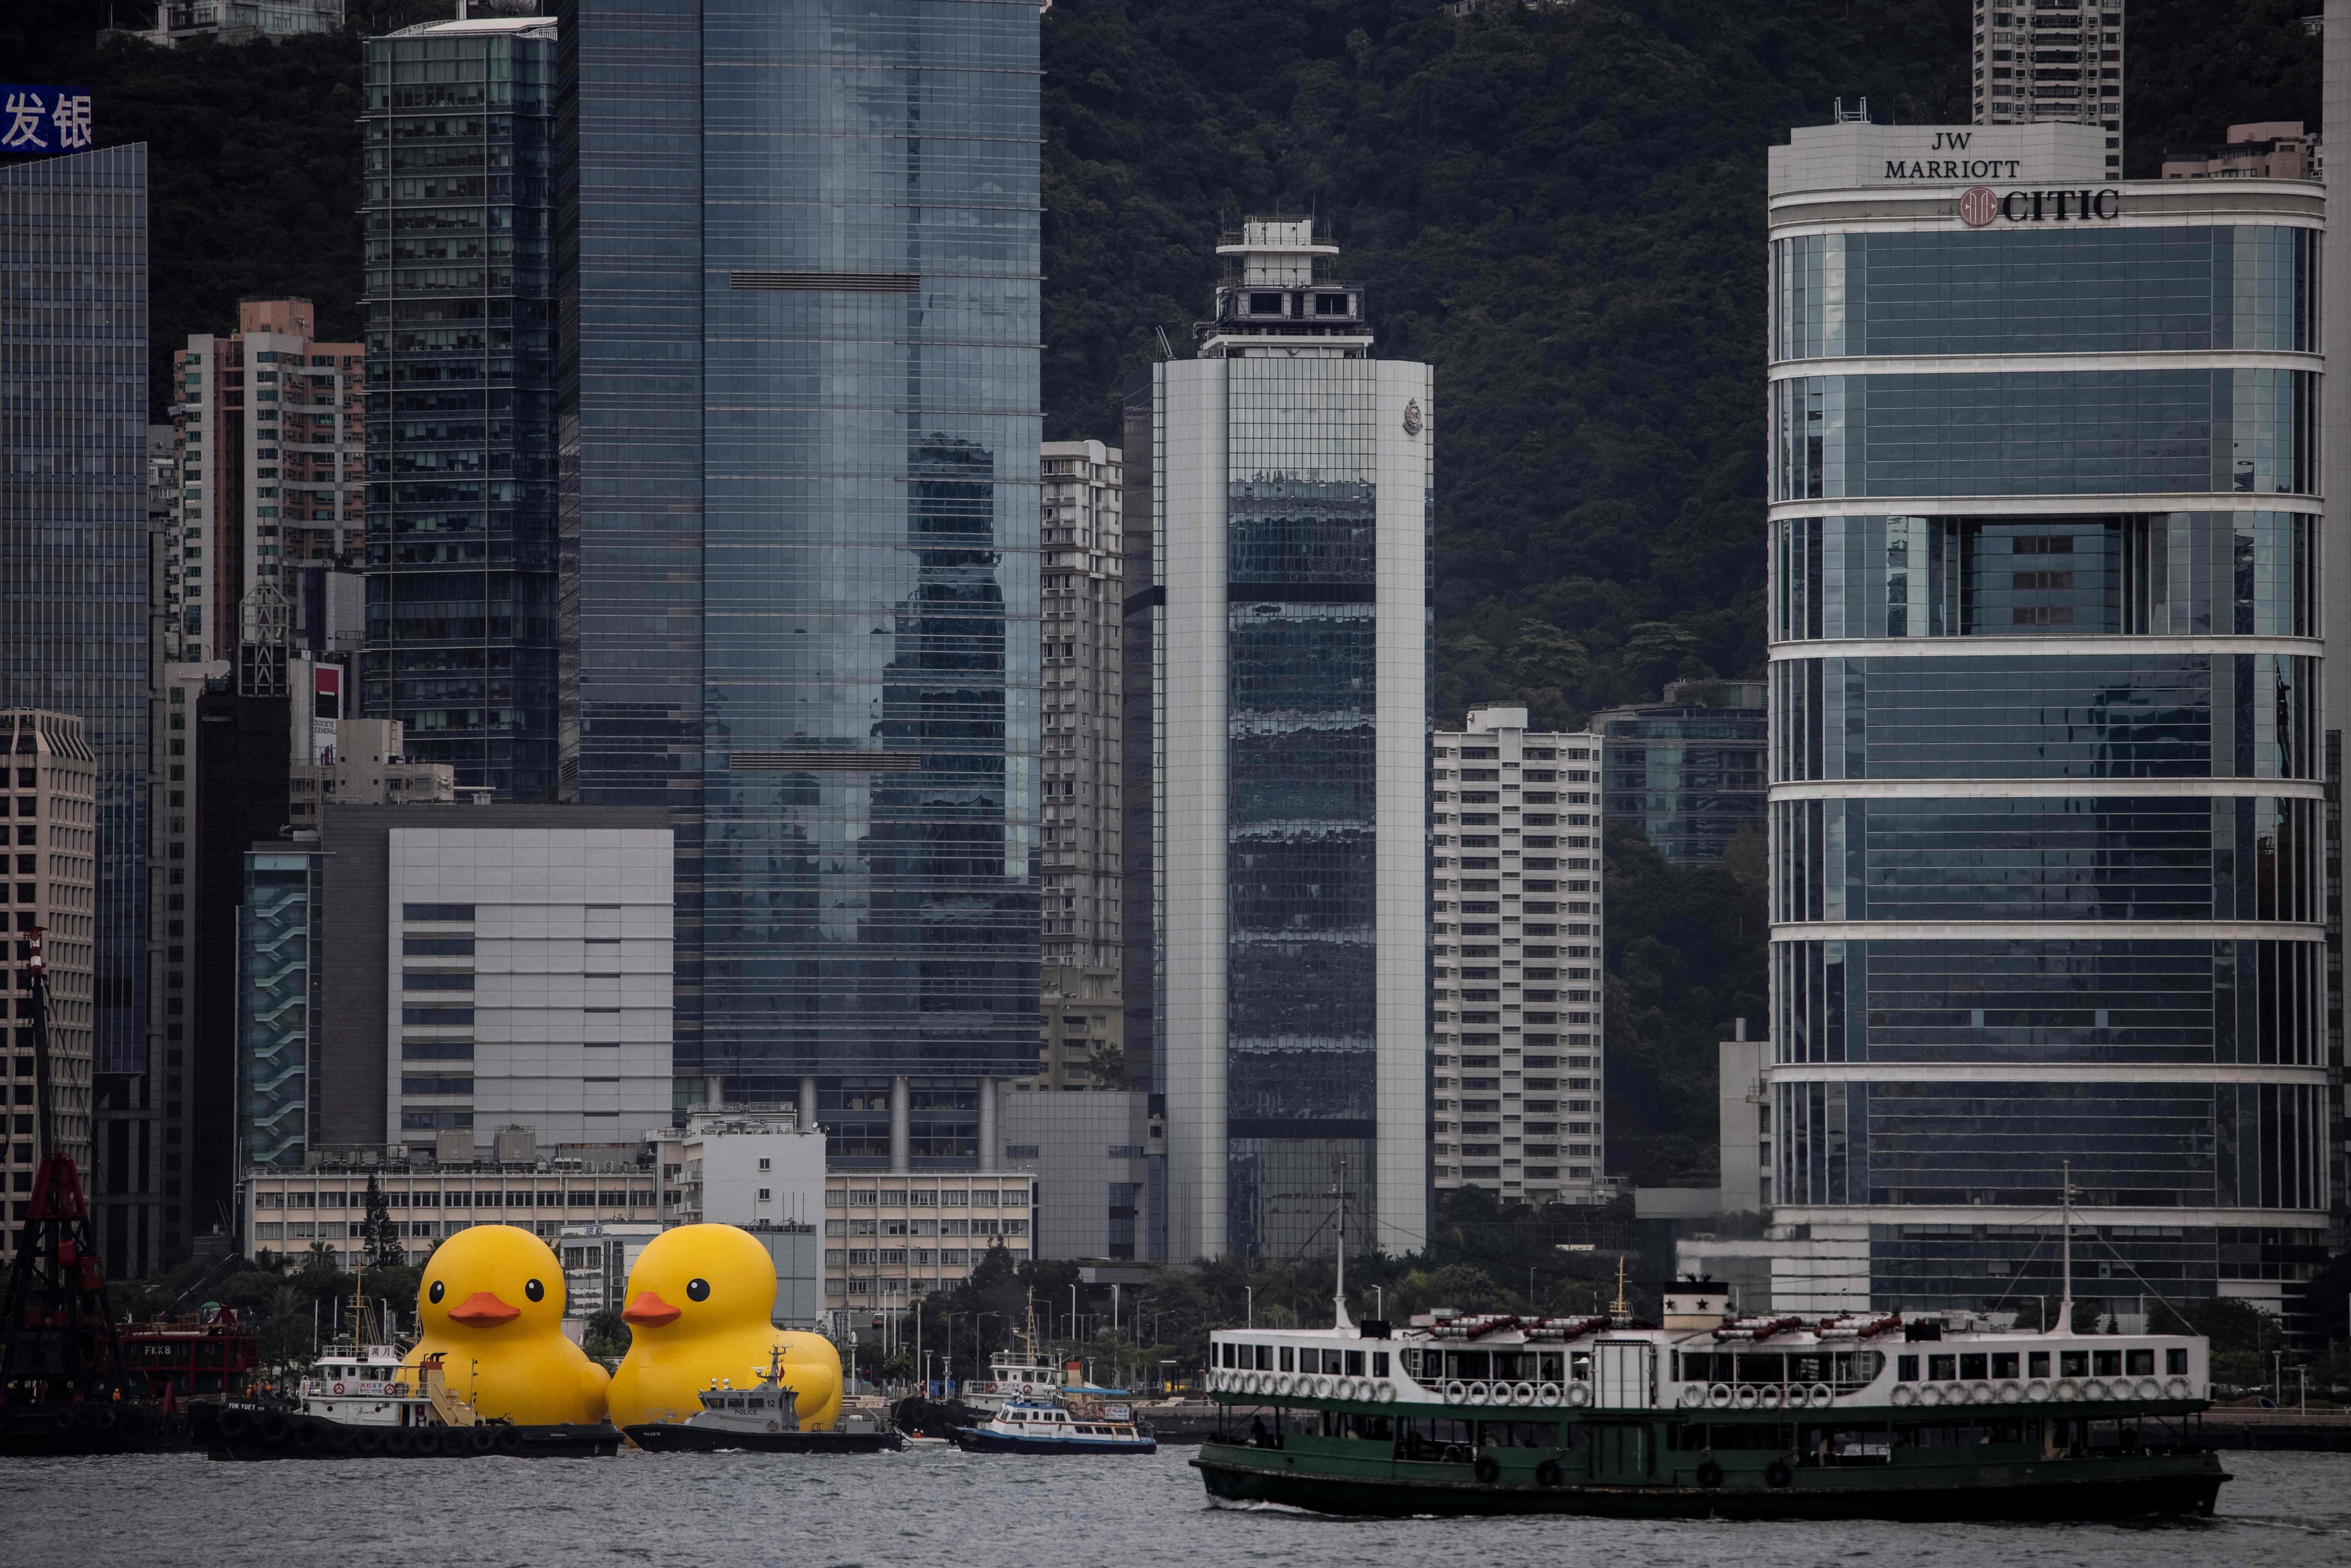 Two large inflatable yellow ducks are seen in Hong Kong’s Victoria Harbour on June 9, as part of a public art exhibition. Compared to the older generations, young people today tend to prioritise work-life balance, travel and entertainment over a strong work ethic. Photo: AFP